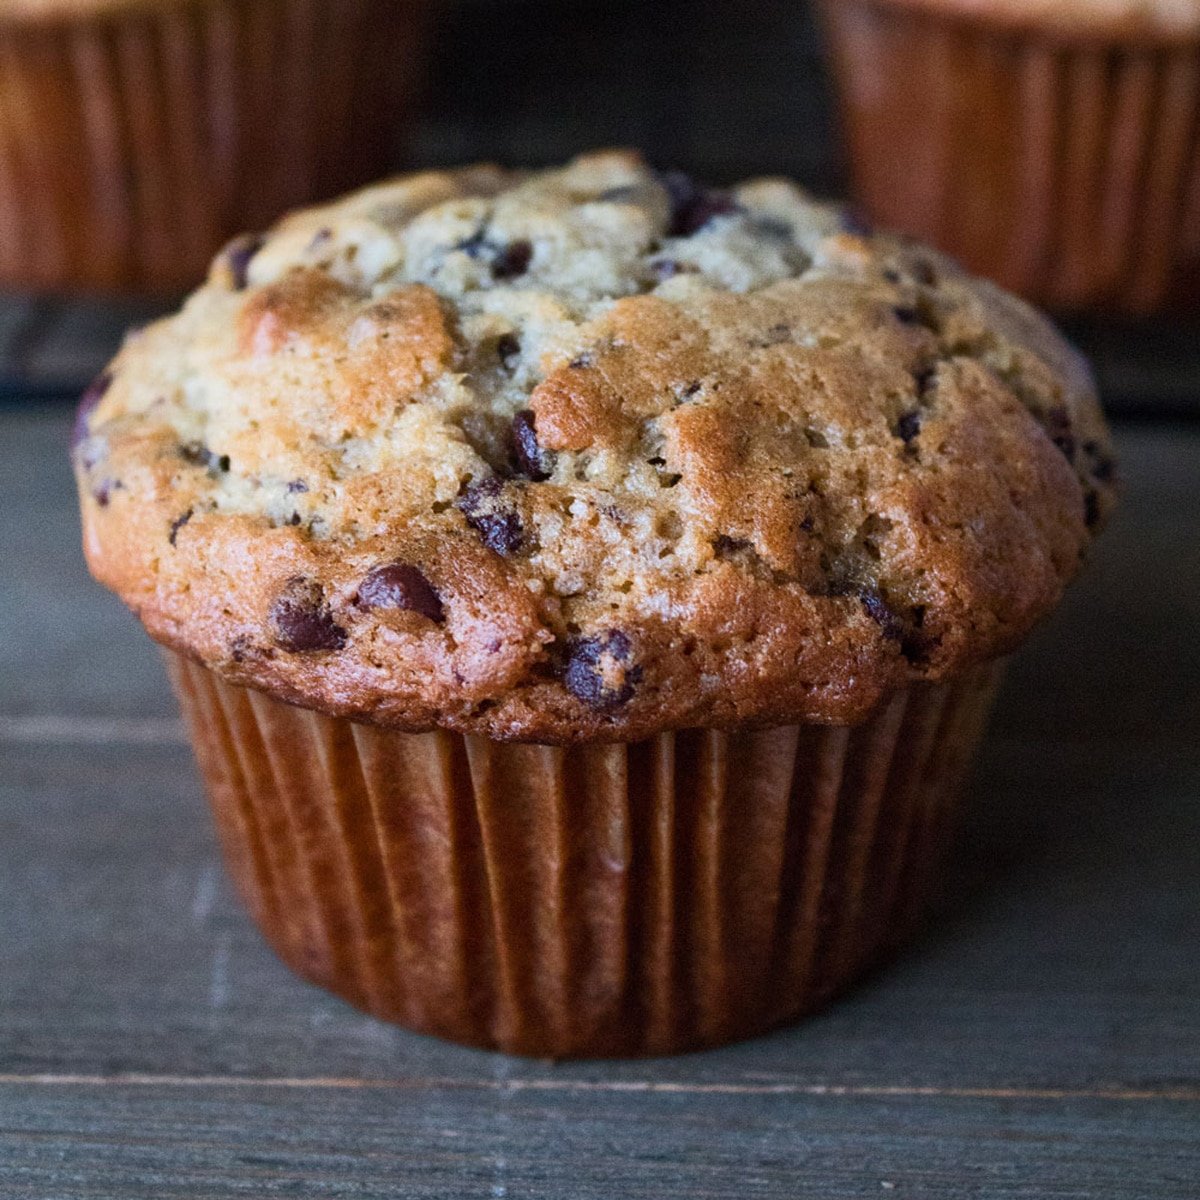 Square image of a chocolate chip banana muffin.